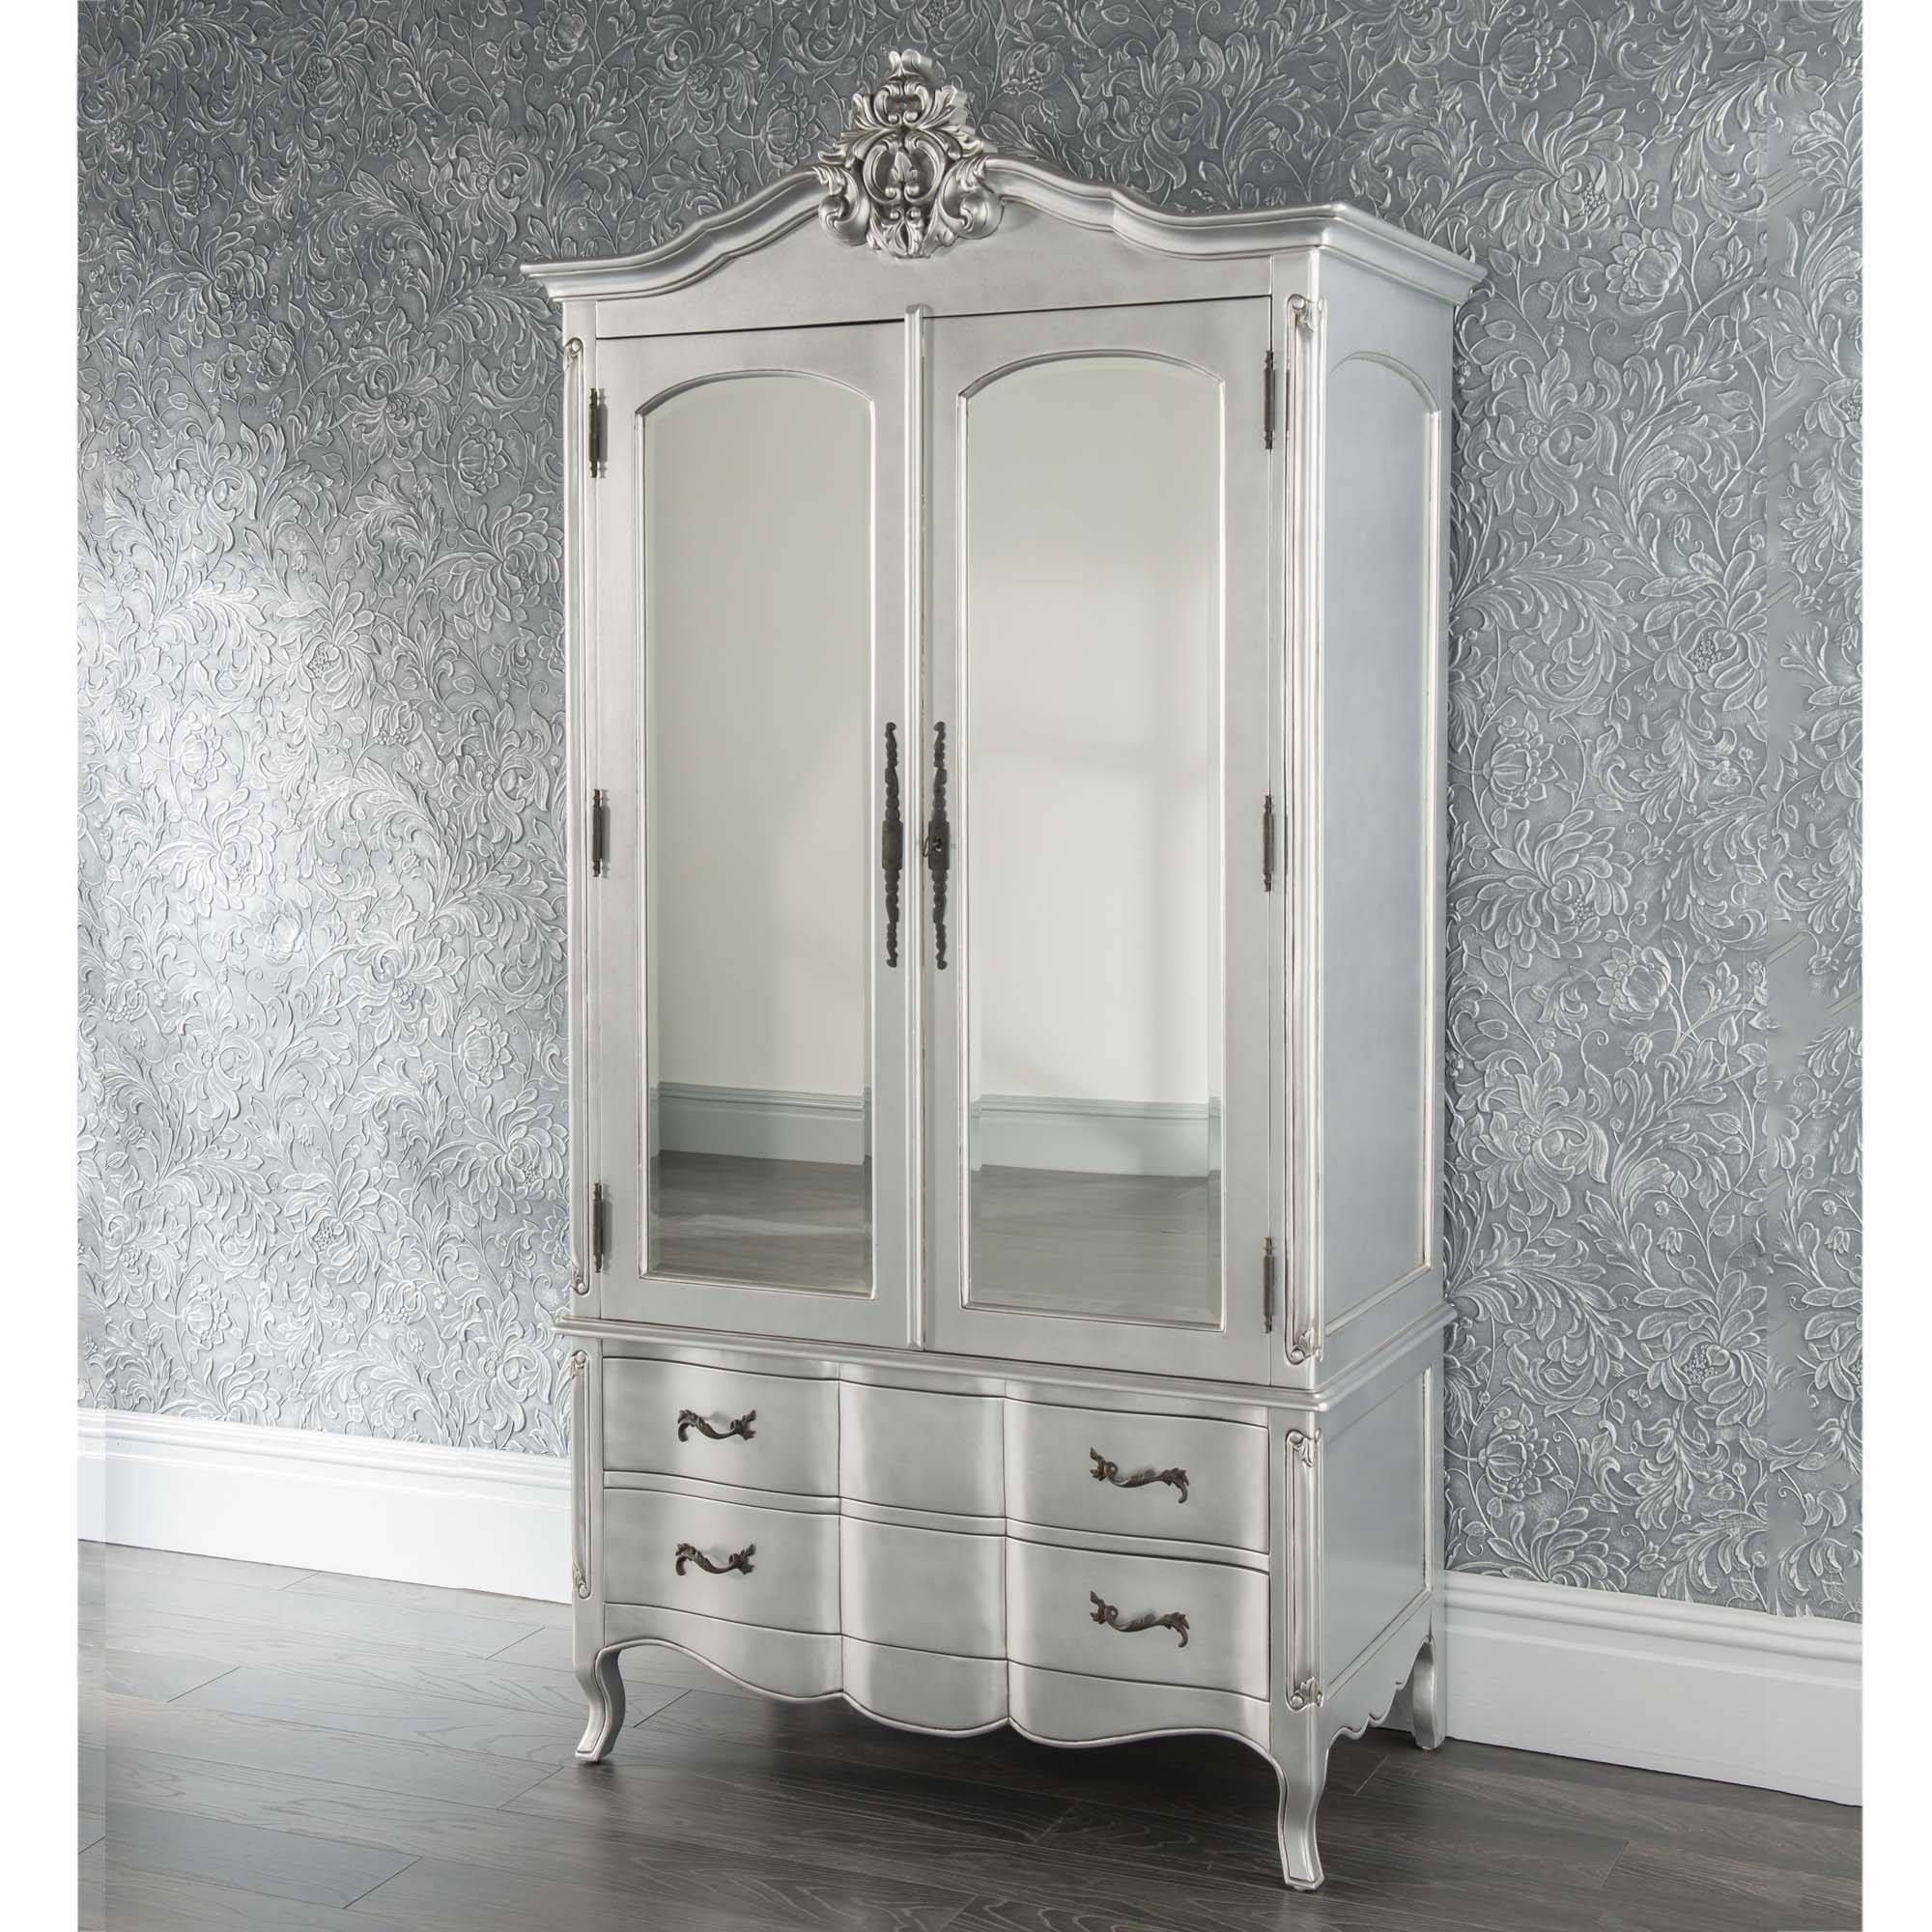 Estelle Antique French Style Wardrobe | Shabby Chic With Black French Style Wardrobes (Photo 9 of 15)